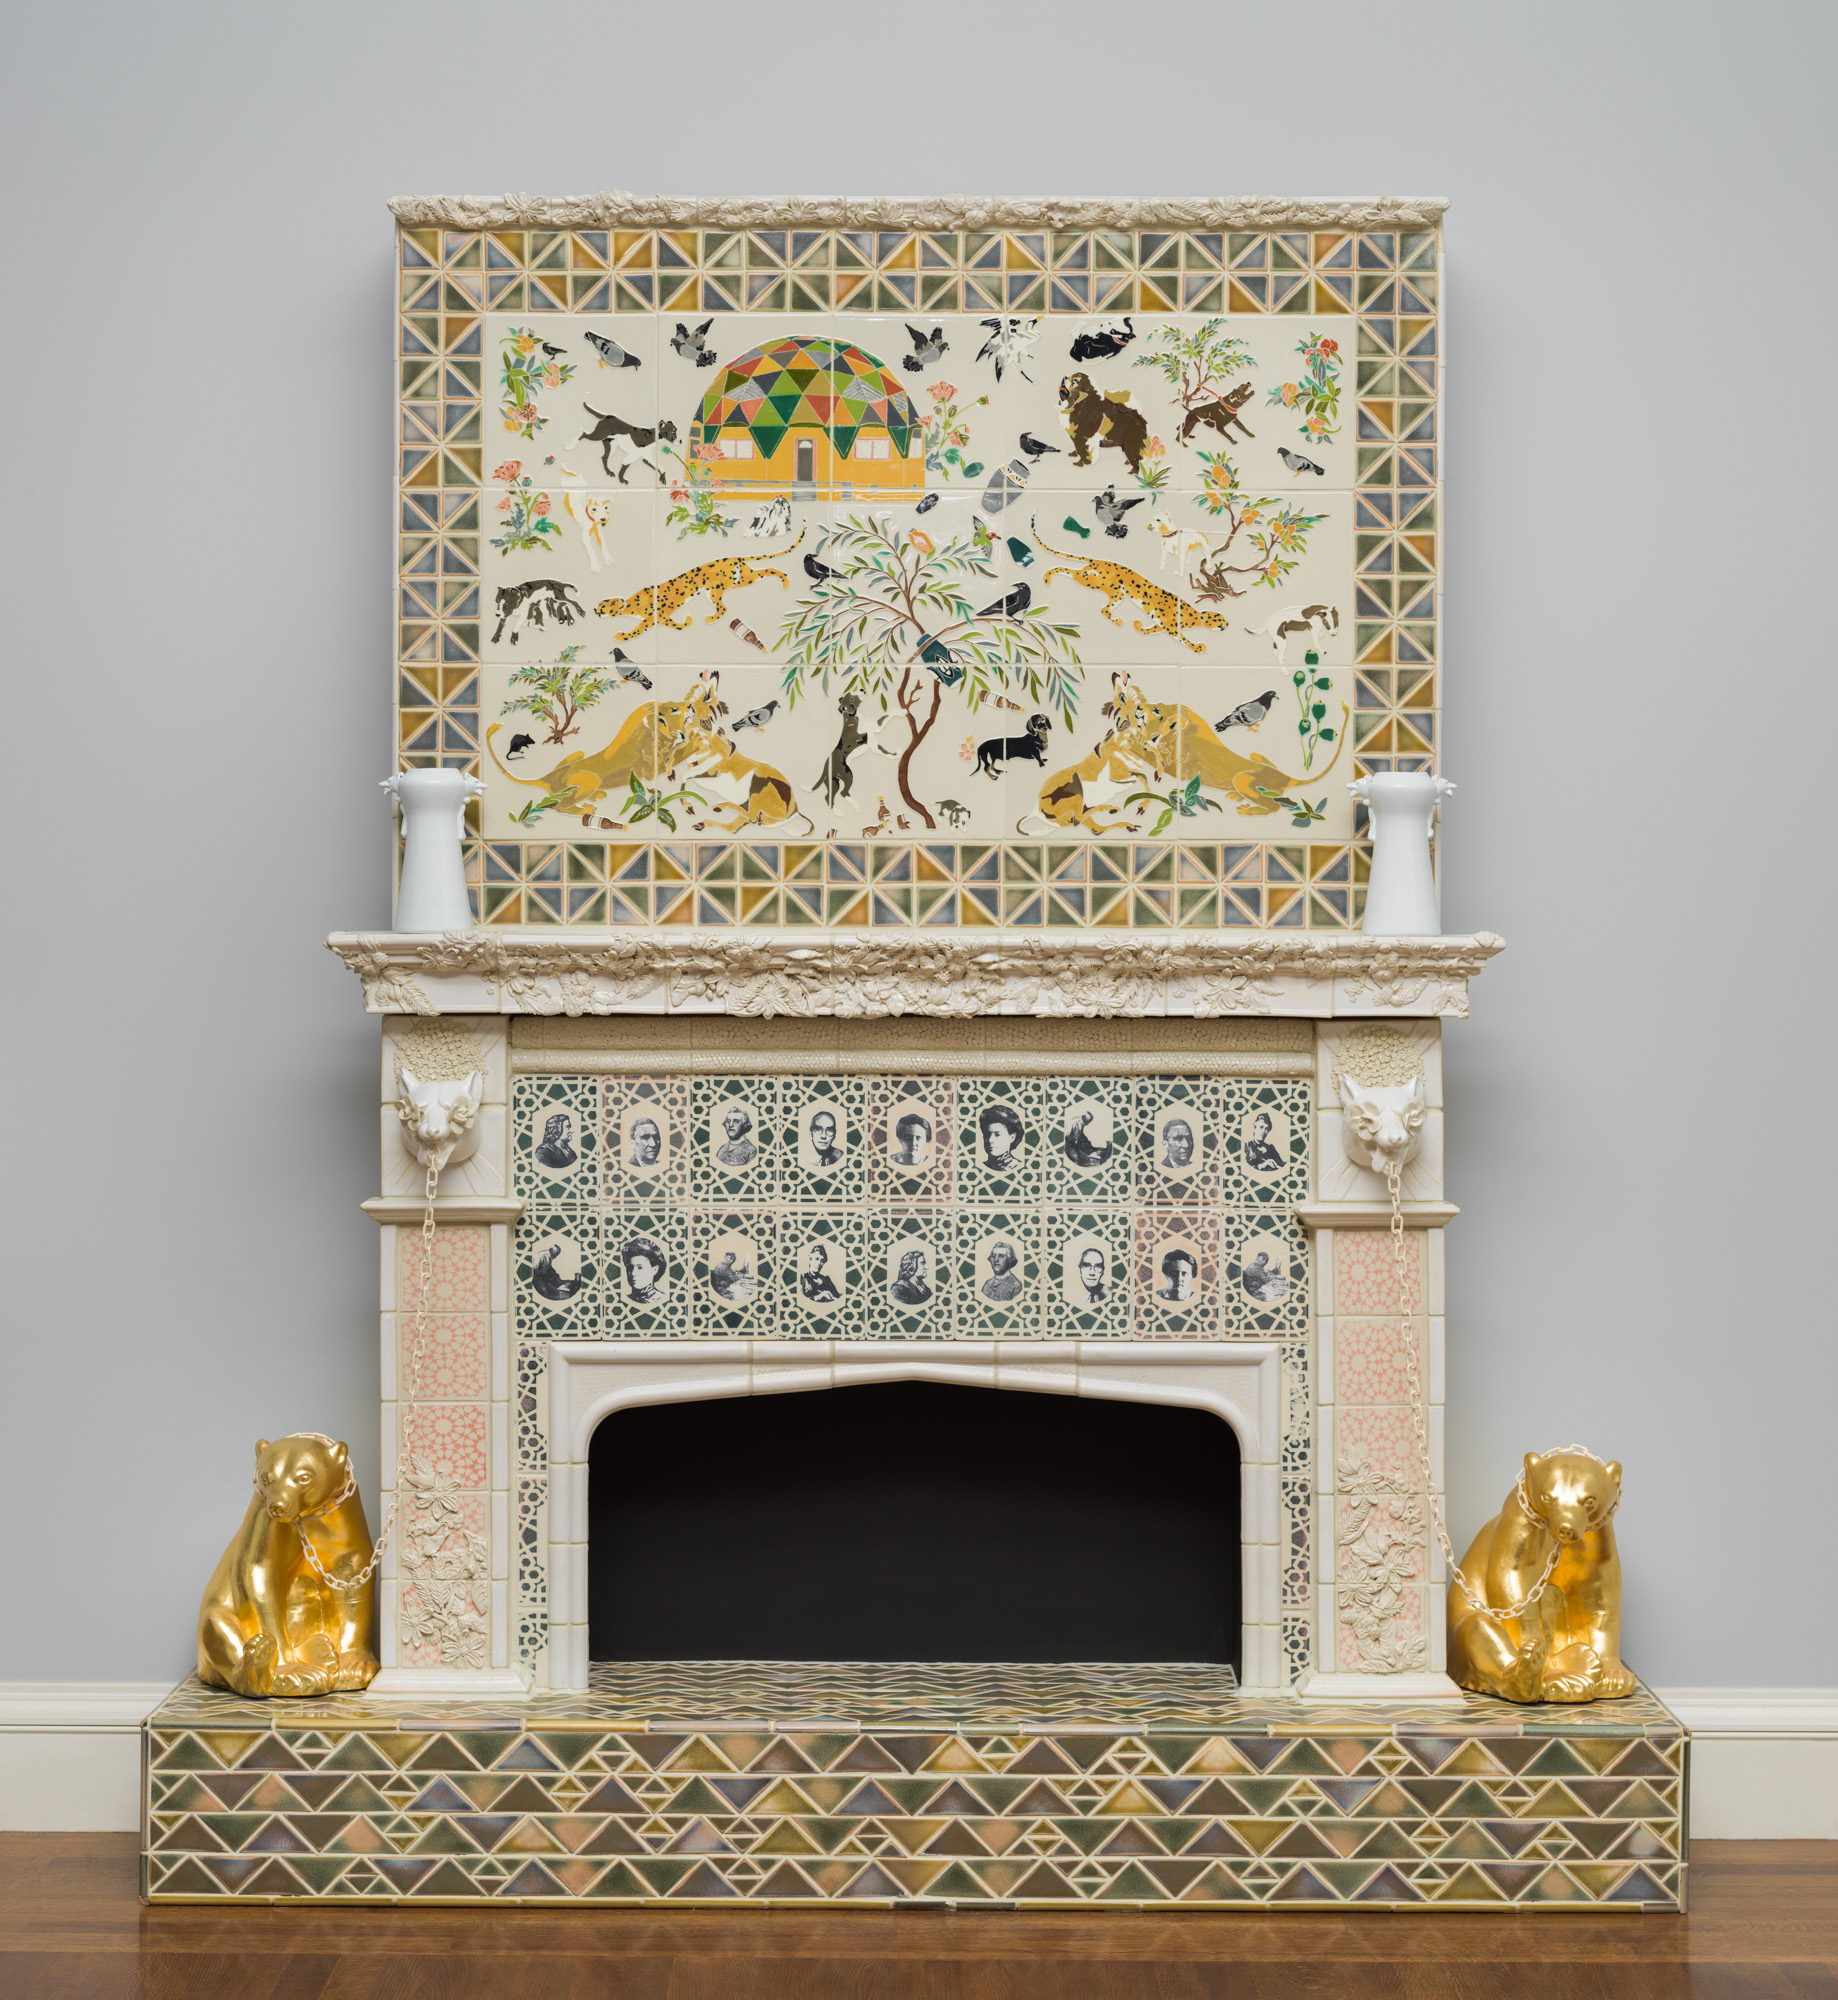 tile fireplace intricately decorated with animals, trees, and portraits